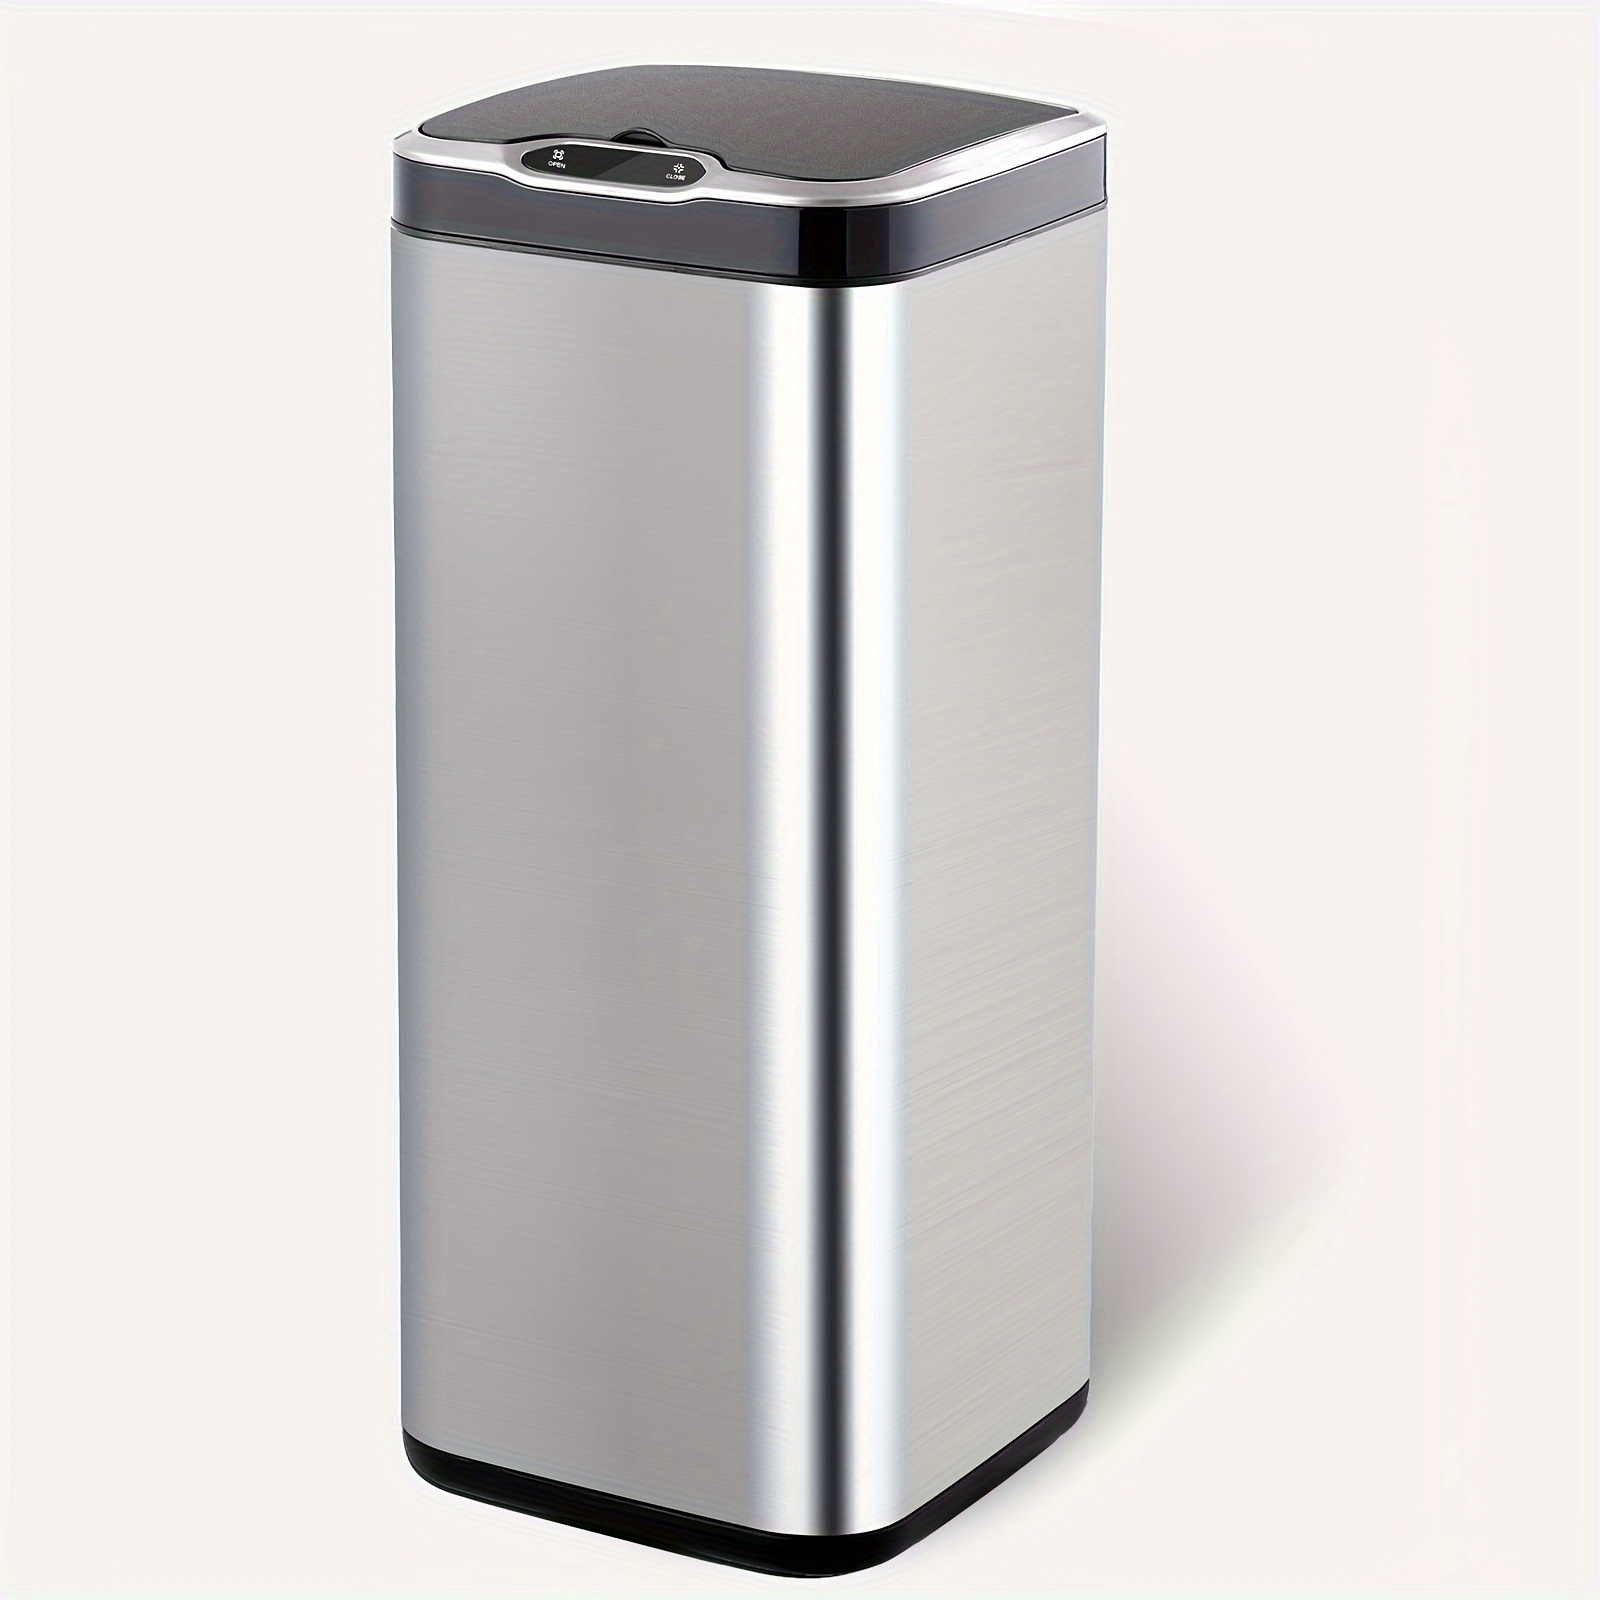 

Elpheco Square Stainless Steel 8 Gallon Sensor Trash Can With Lid, 30 Liter Automatic Kitchen Garbage Can, Slim Metal Trash Can For Home, Hotel, Office Building, Public Places, 3 Aa